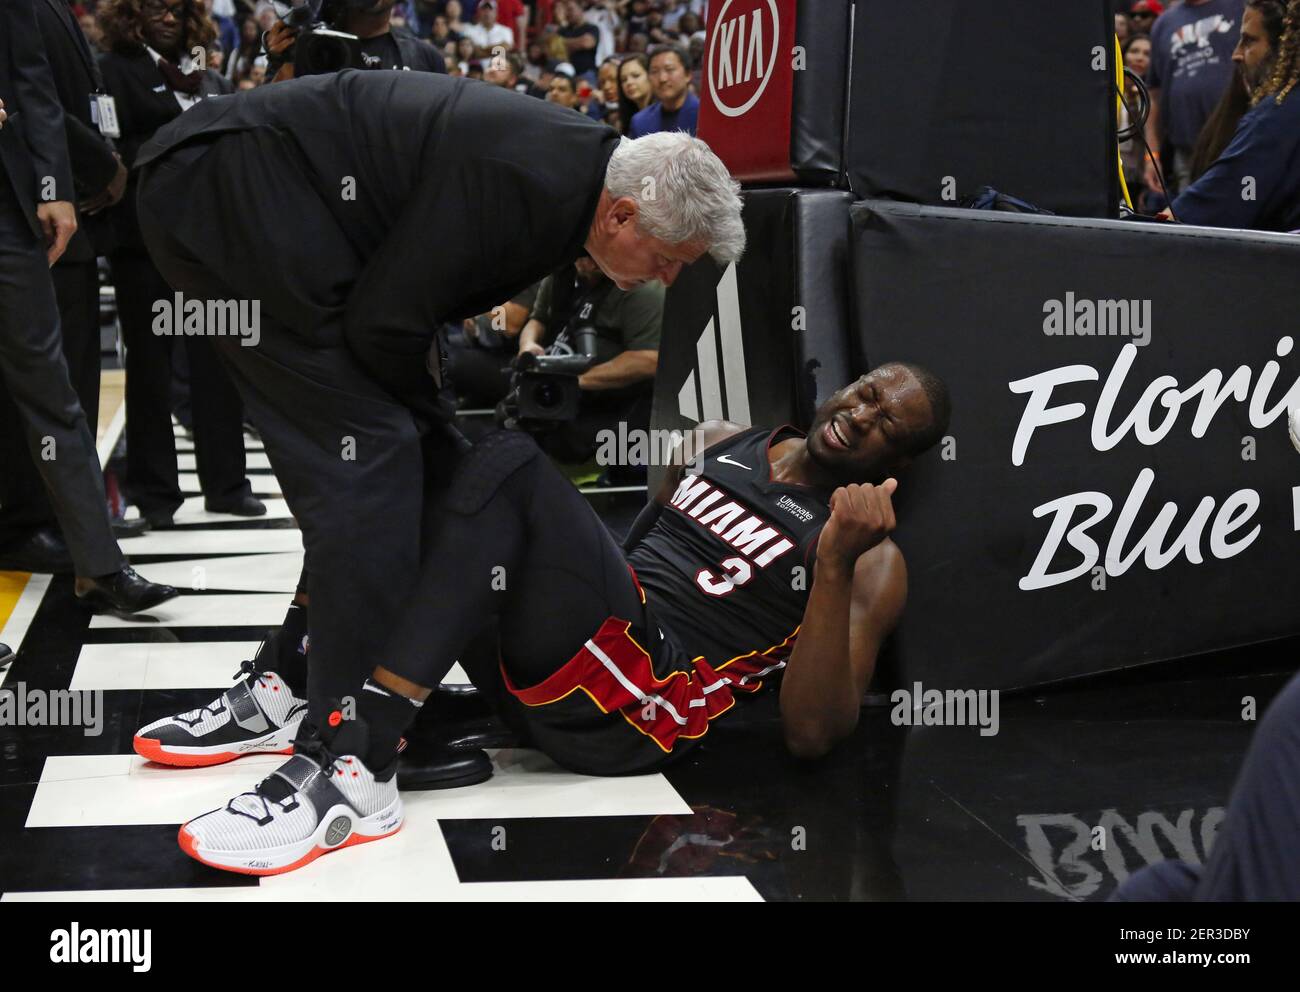 Miami Heat athletic trainer Jay Sabol works with guard Dwyane Wade after a  play during overtime against the Brooklyn Nets at the AmericanAirlines  Arena in Miami on Saturday, March 31, 2018. The